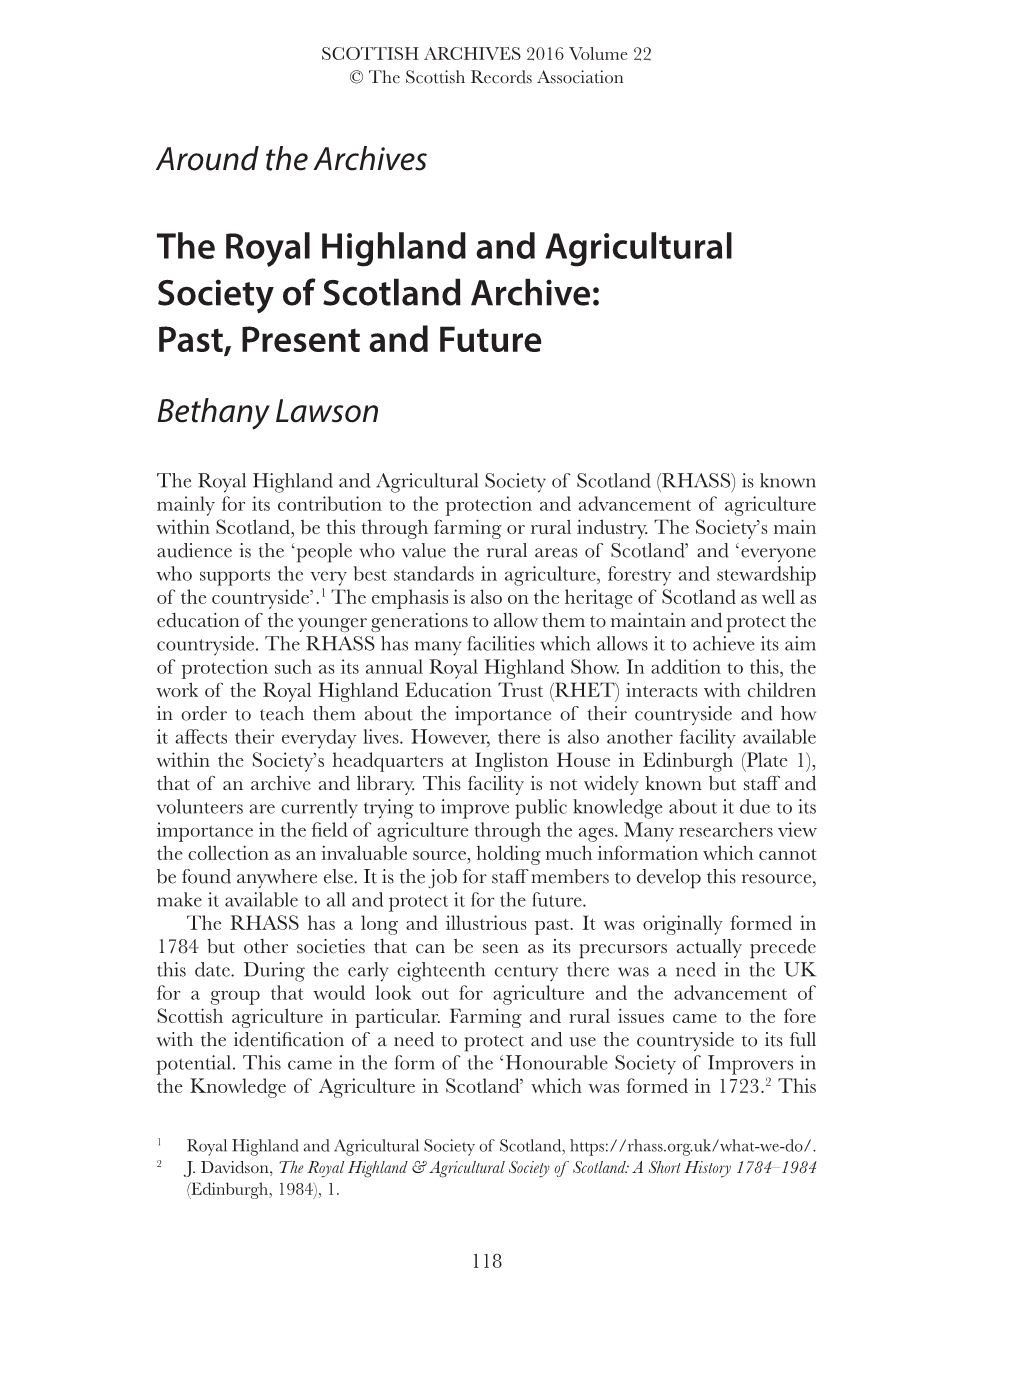 The Royal Highland and Agricultural Society of Scotland Archive: Past, Present and Future